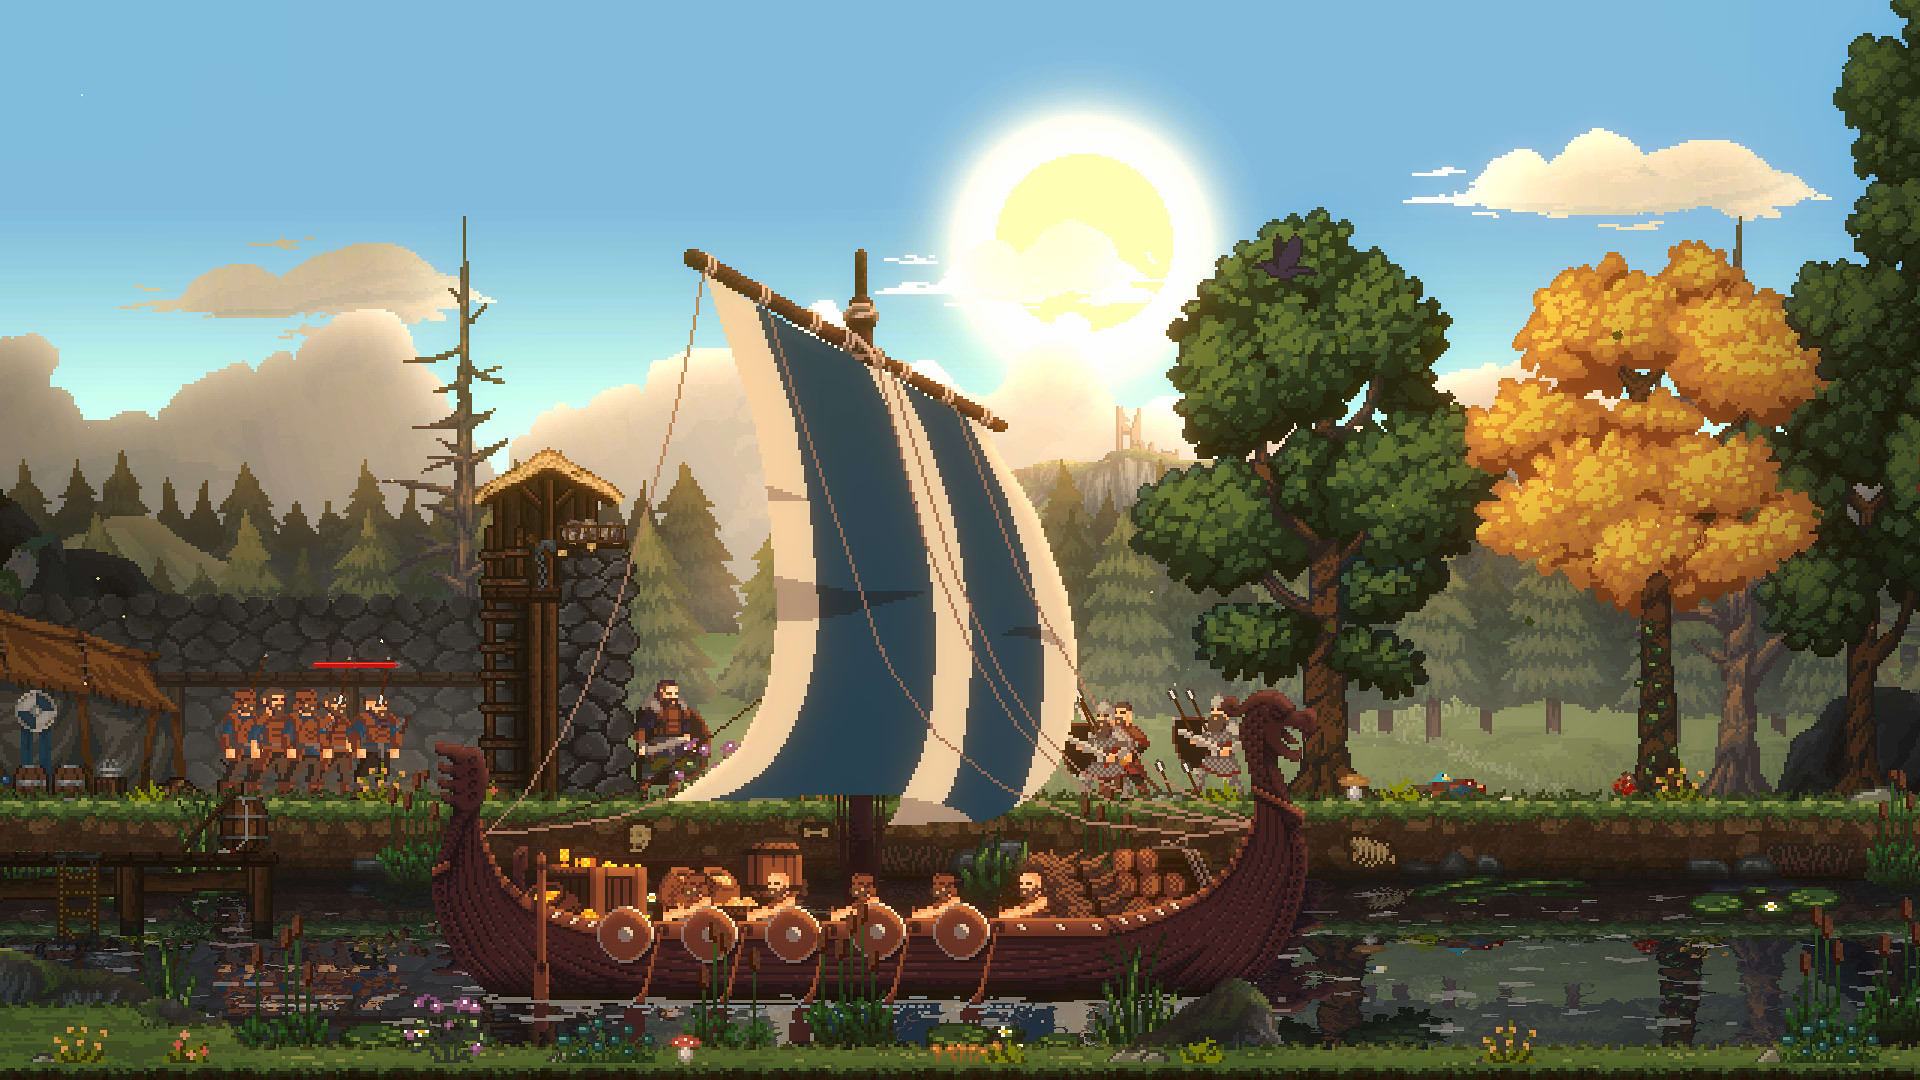 Sons of Valhalla screenshot showing a gorgeous pixel art scene.